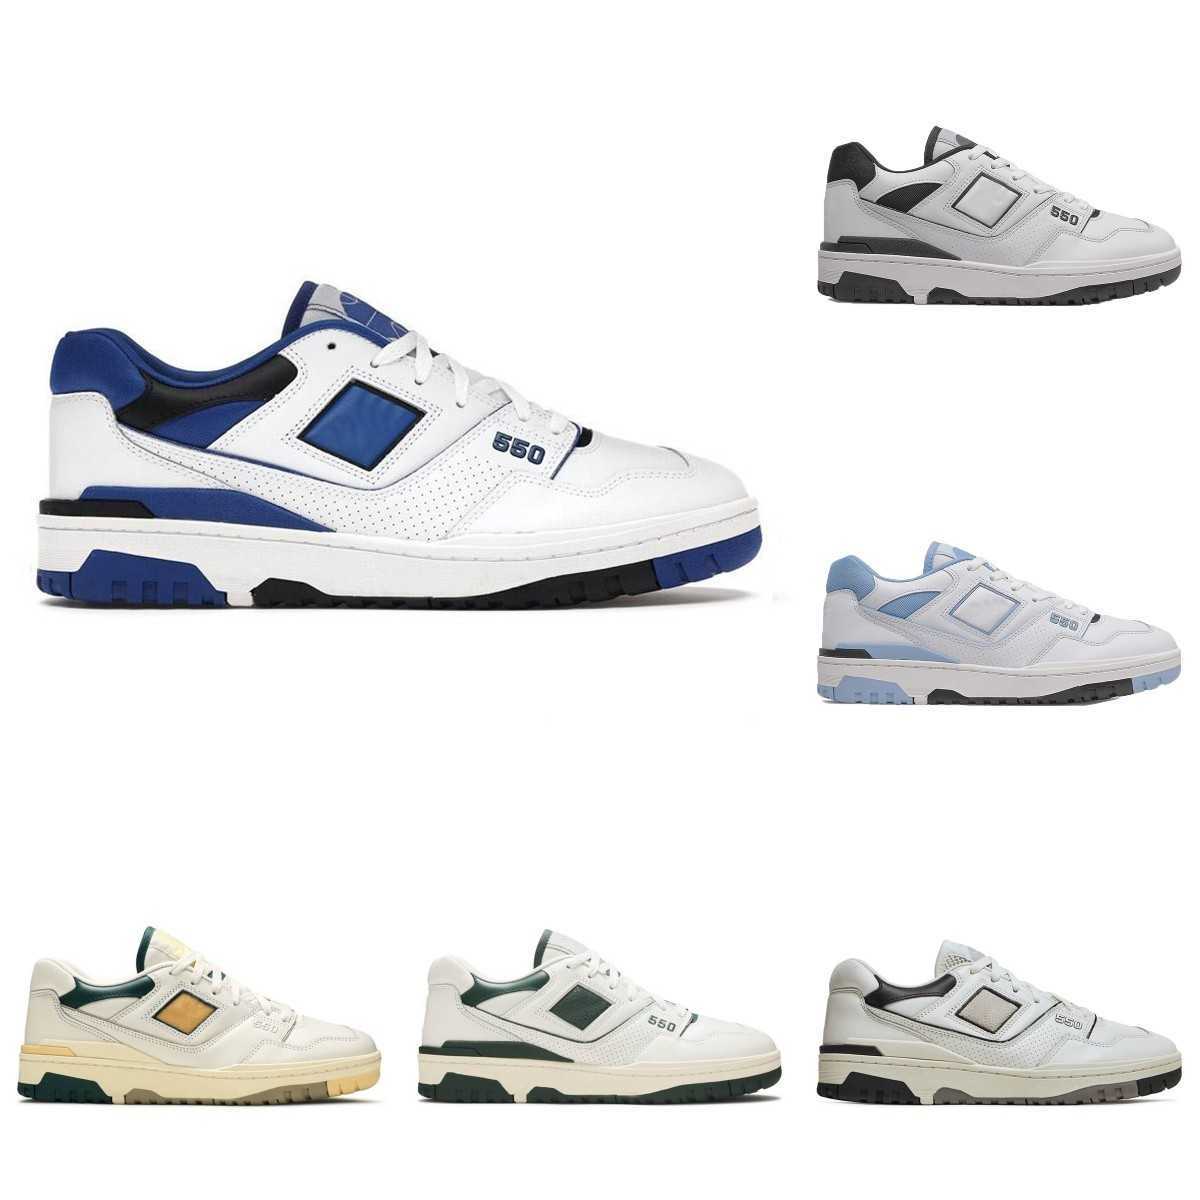 

New BB550 B550 550 Outdoor Shoes Men Women White Green Grey Cream Black Blue UNC Navy Purple Shadow Syracuse Burgundy Cyan AURALEE Mens Trainers Designers Sports S02, Please contact us